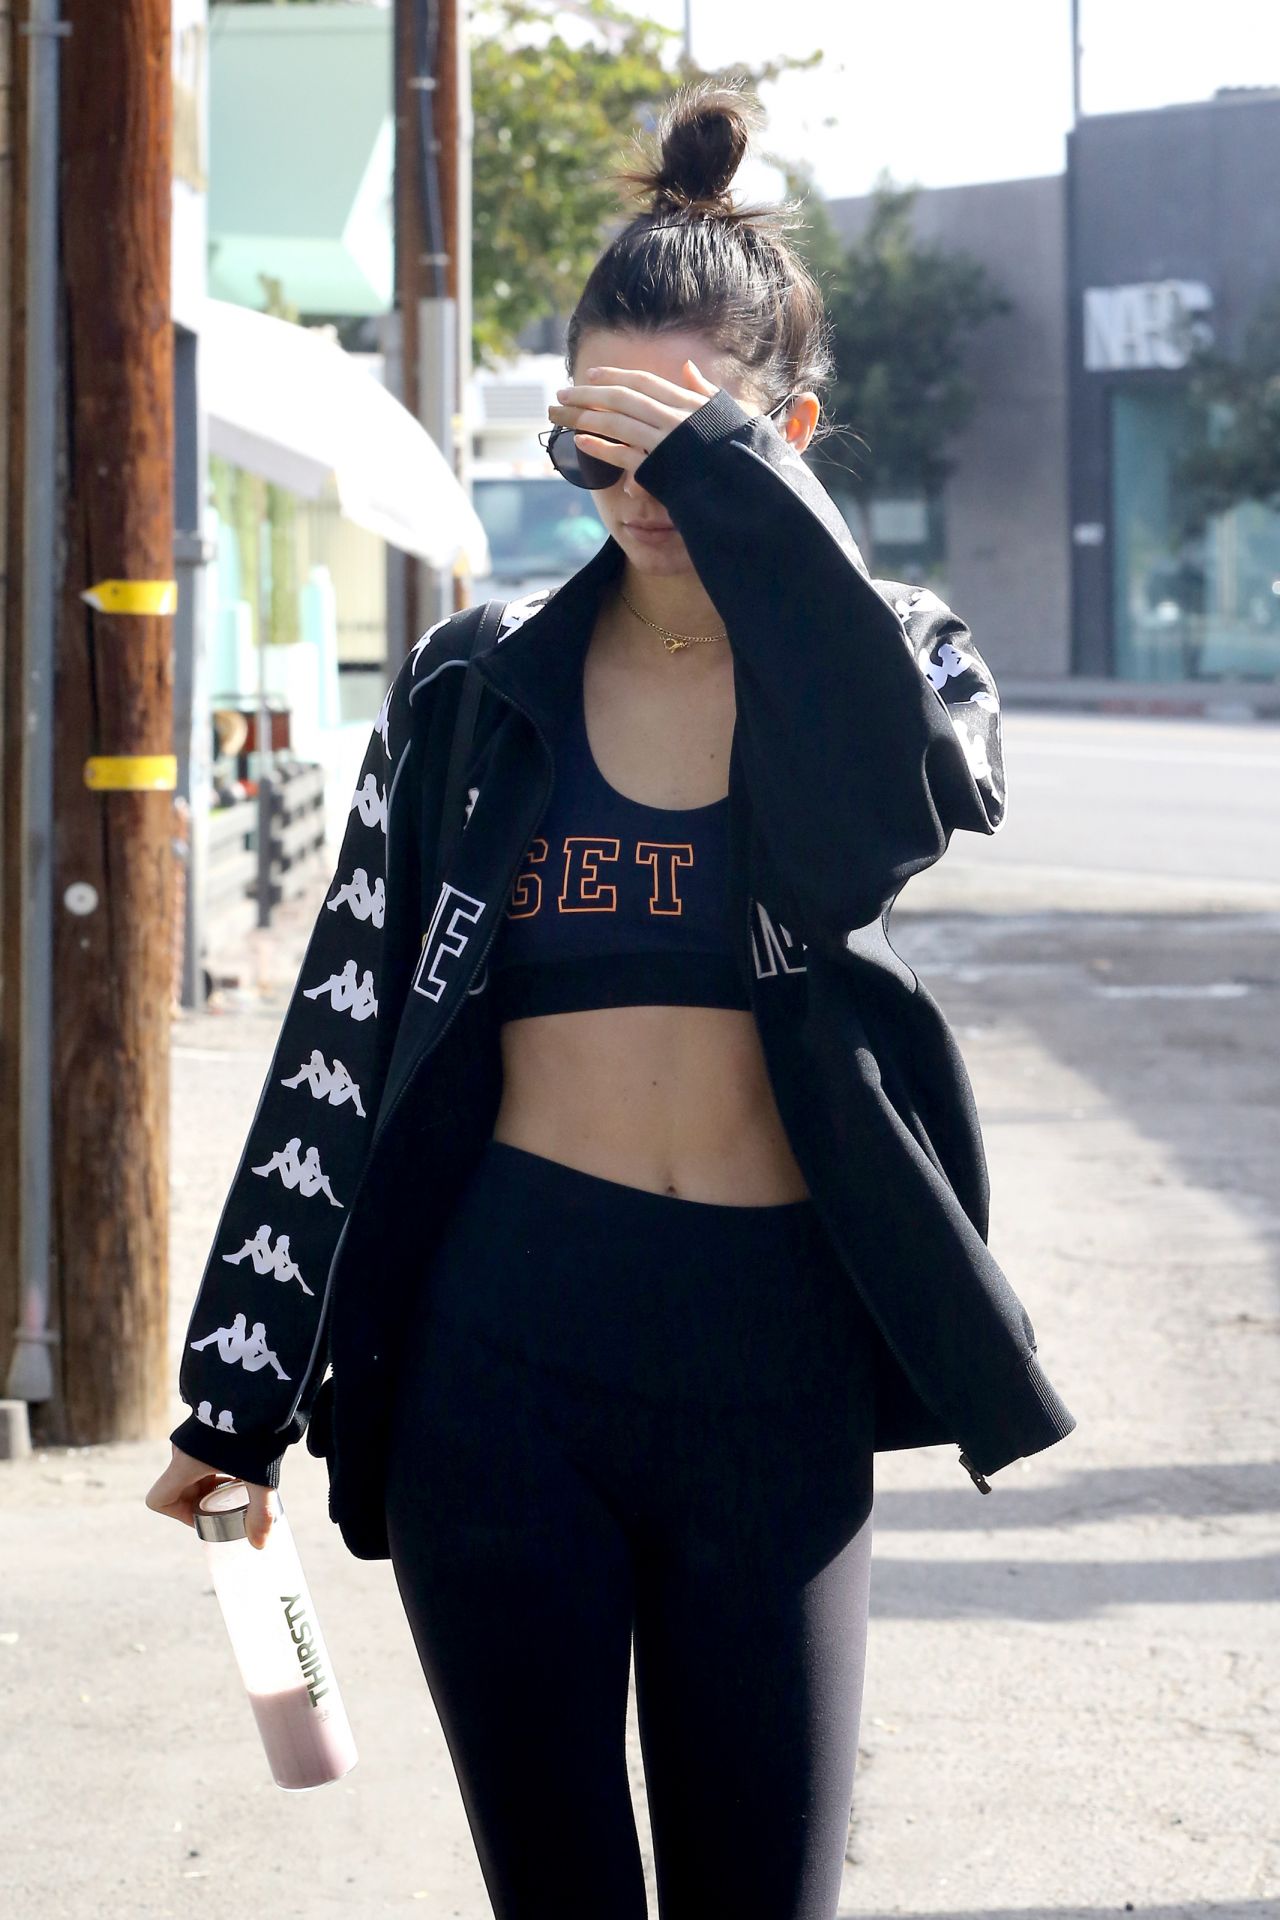 Kendall Jenner Going To the Gym July 27, 2017 – Star Style